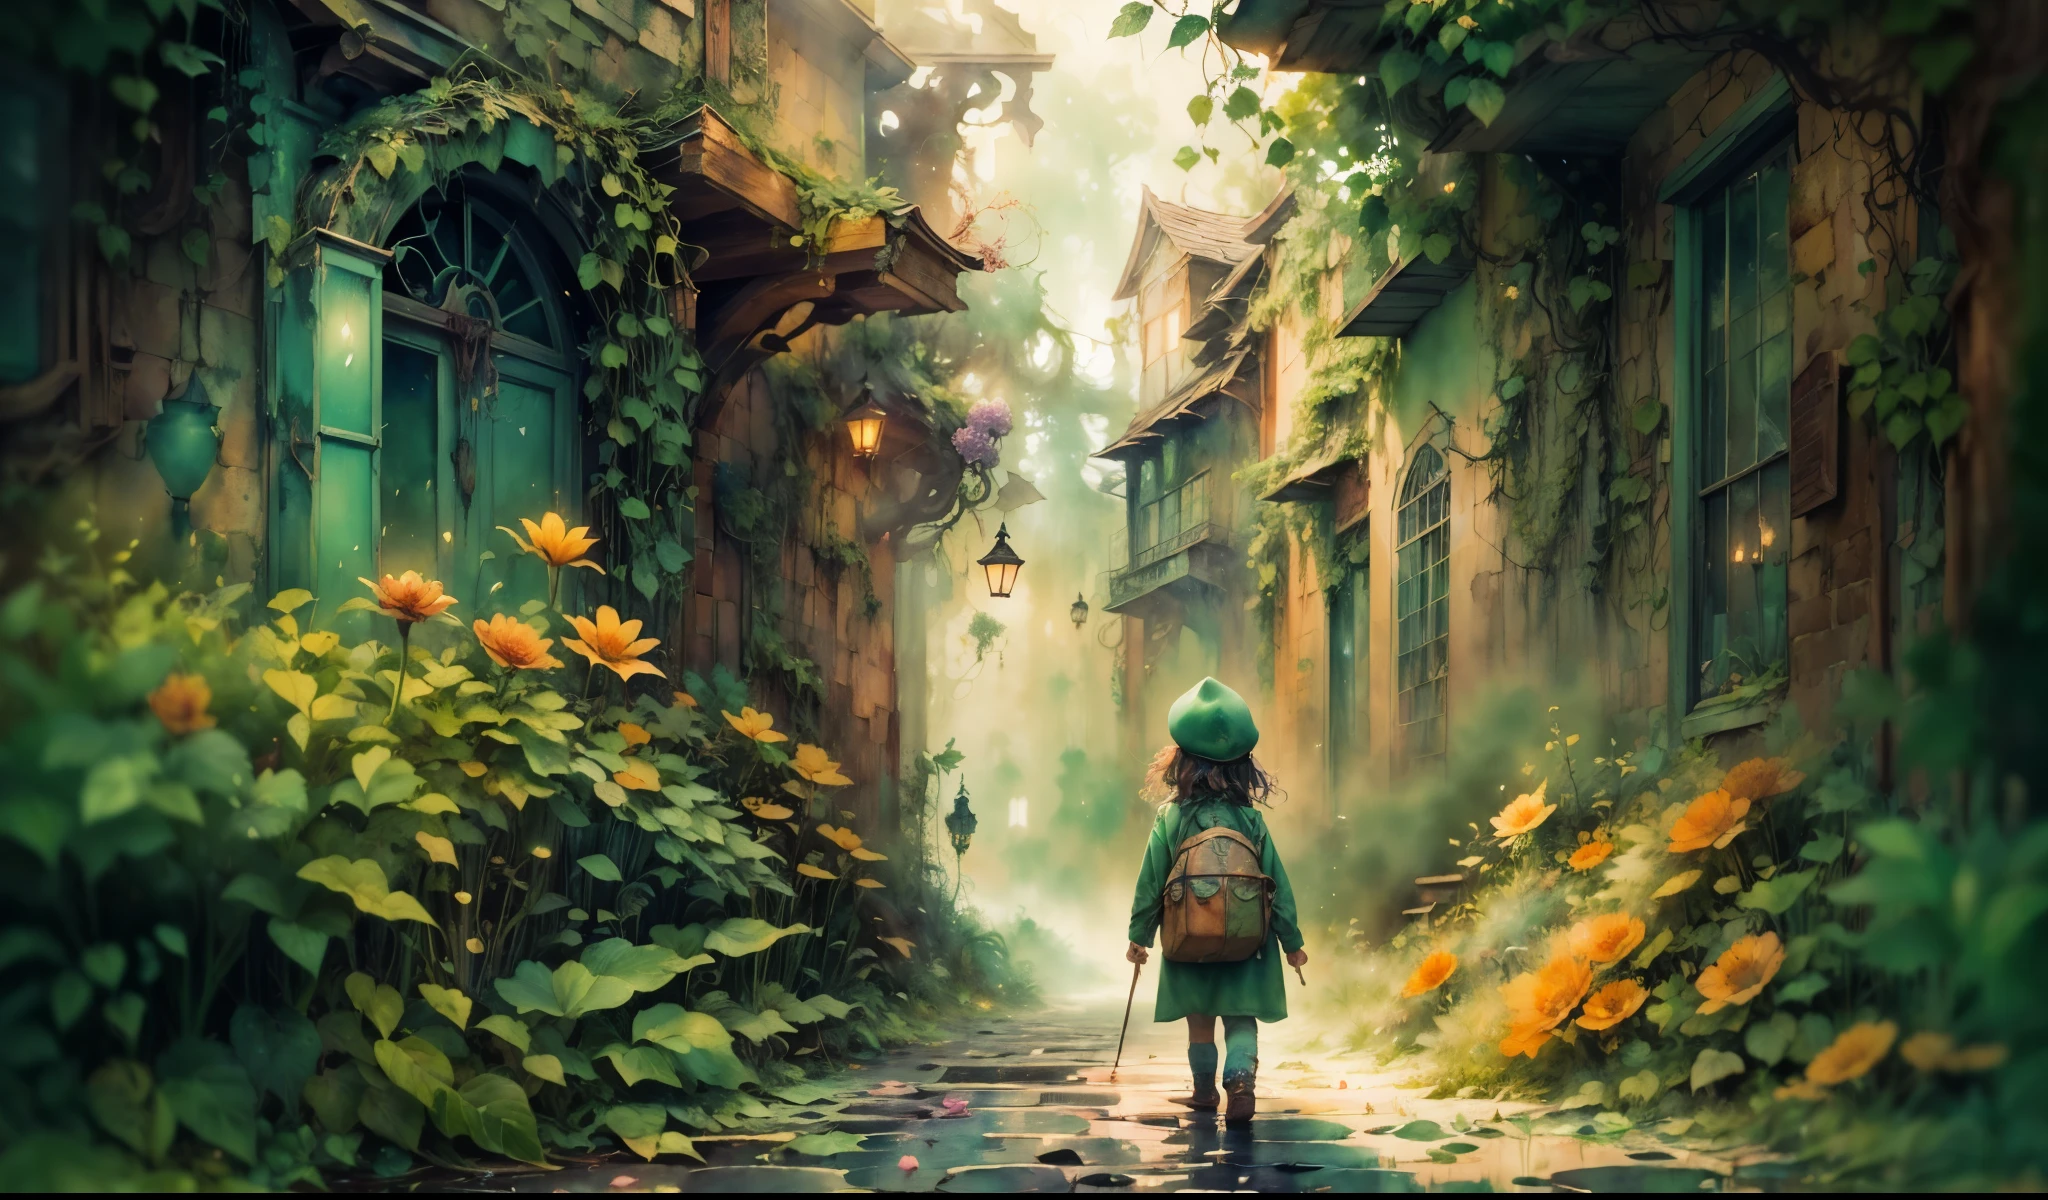 ((watercolor art)),(a tiny) human, (holding firmly) a bunch of flowers, watercolor, dark gritty, street, fantasy, (best quality, 4k, highres, masterpiece:1.2), ultra-detailed, (realistic:1.37), vivid colors, (moody lighting), (magical atmosphere), (cobblestone road), (mysterious shadows), (fantastical architecture), (enchanted surroundings), (whimsical elements), (misty aura), (intricate details), (emotionally expressive face), (unique character design), (lush foliage), (overgrown vines), (ethereal glow), (fallen petals), (contrast between light and dark), (captivating atmosphere), (heartwarming scene), (playful energy), (curiosity and wonder), (texture of the flowers), (impressionistic brushstrokes), (dreamlike charm), (sense of mystery), (gritty urban setting), (imaginative world), (dramatic composition), (expressive lines), (exquisite colors)